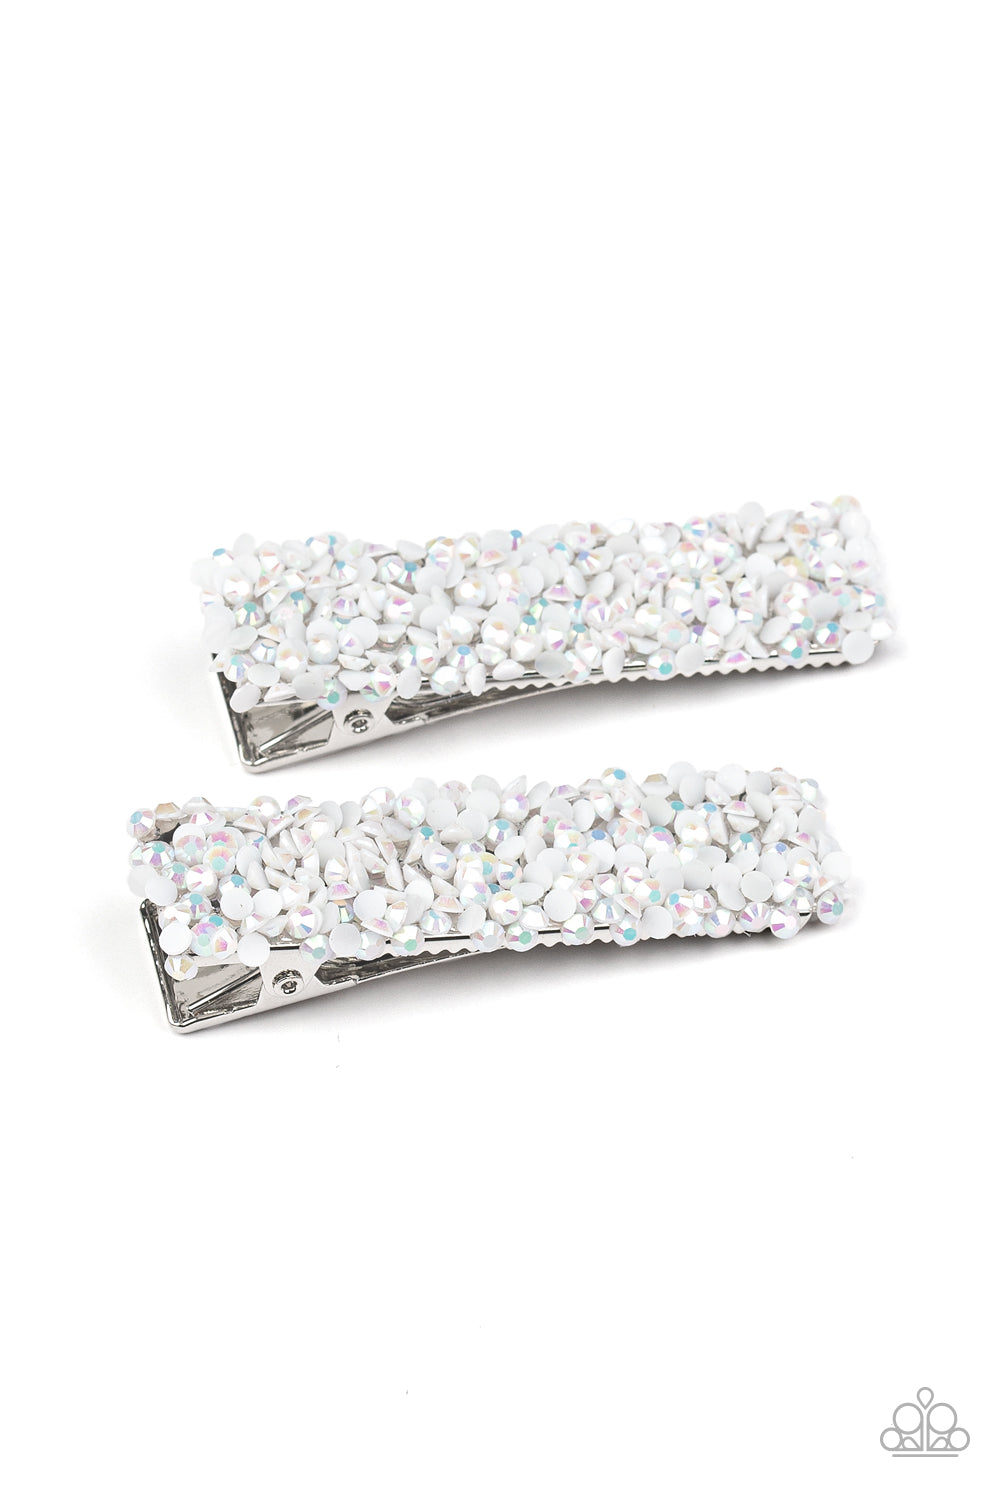 HAIR Comes Trouble - White and Iridescent Rhinestone Hair Clips - Paparazzi Accessories